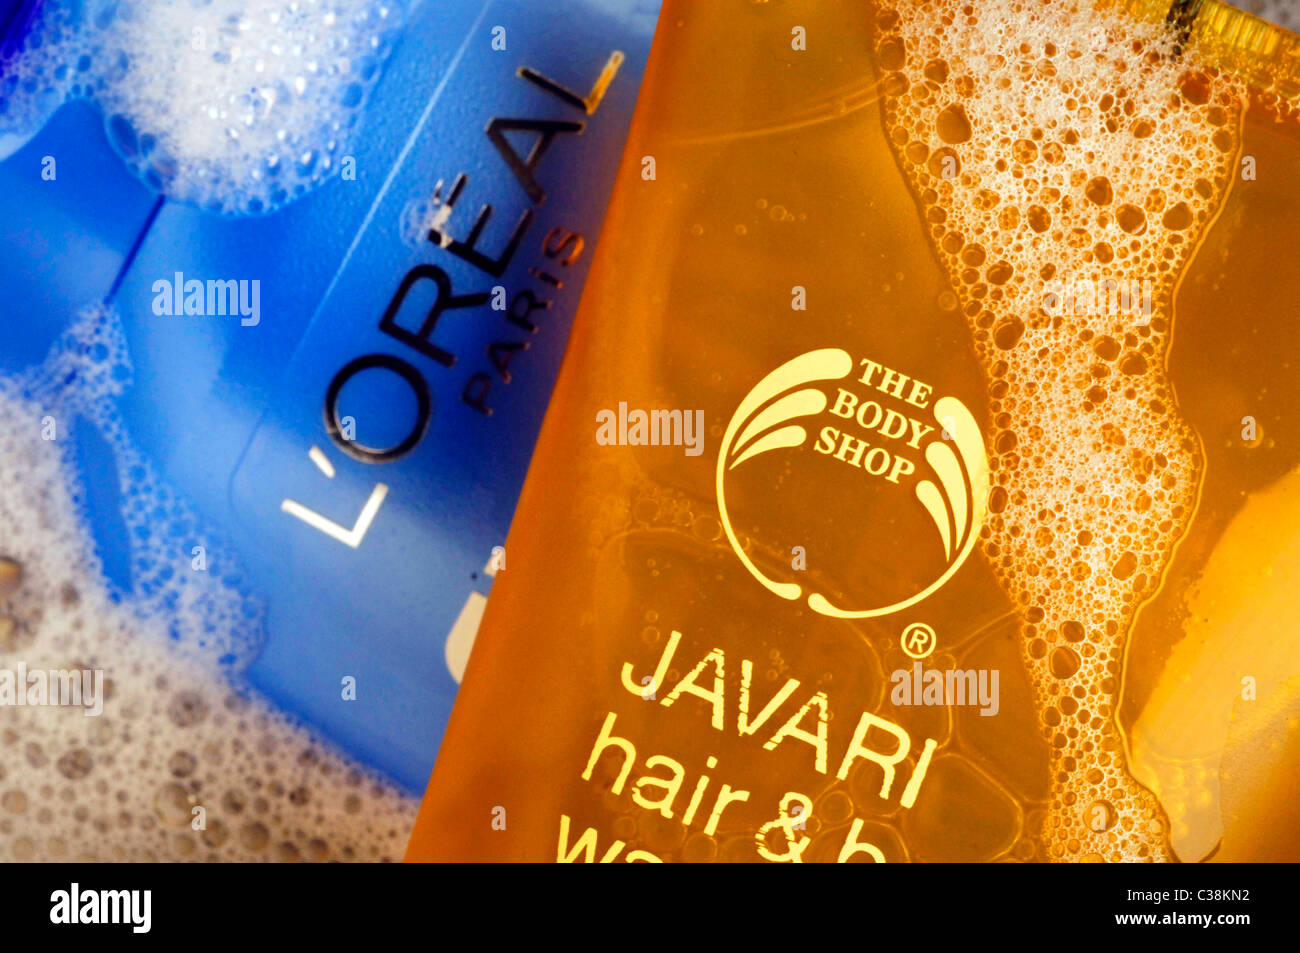 Figurative image of The Body Shop; part of the L'Oreal group Stock Photo -  Alamy